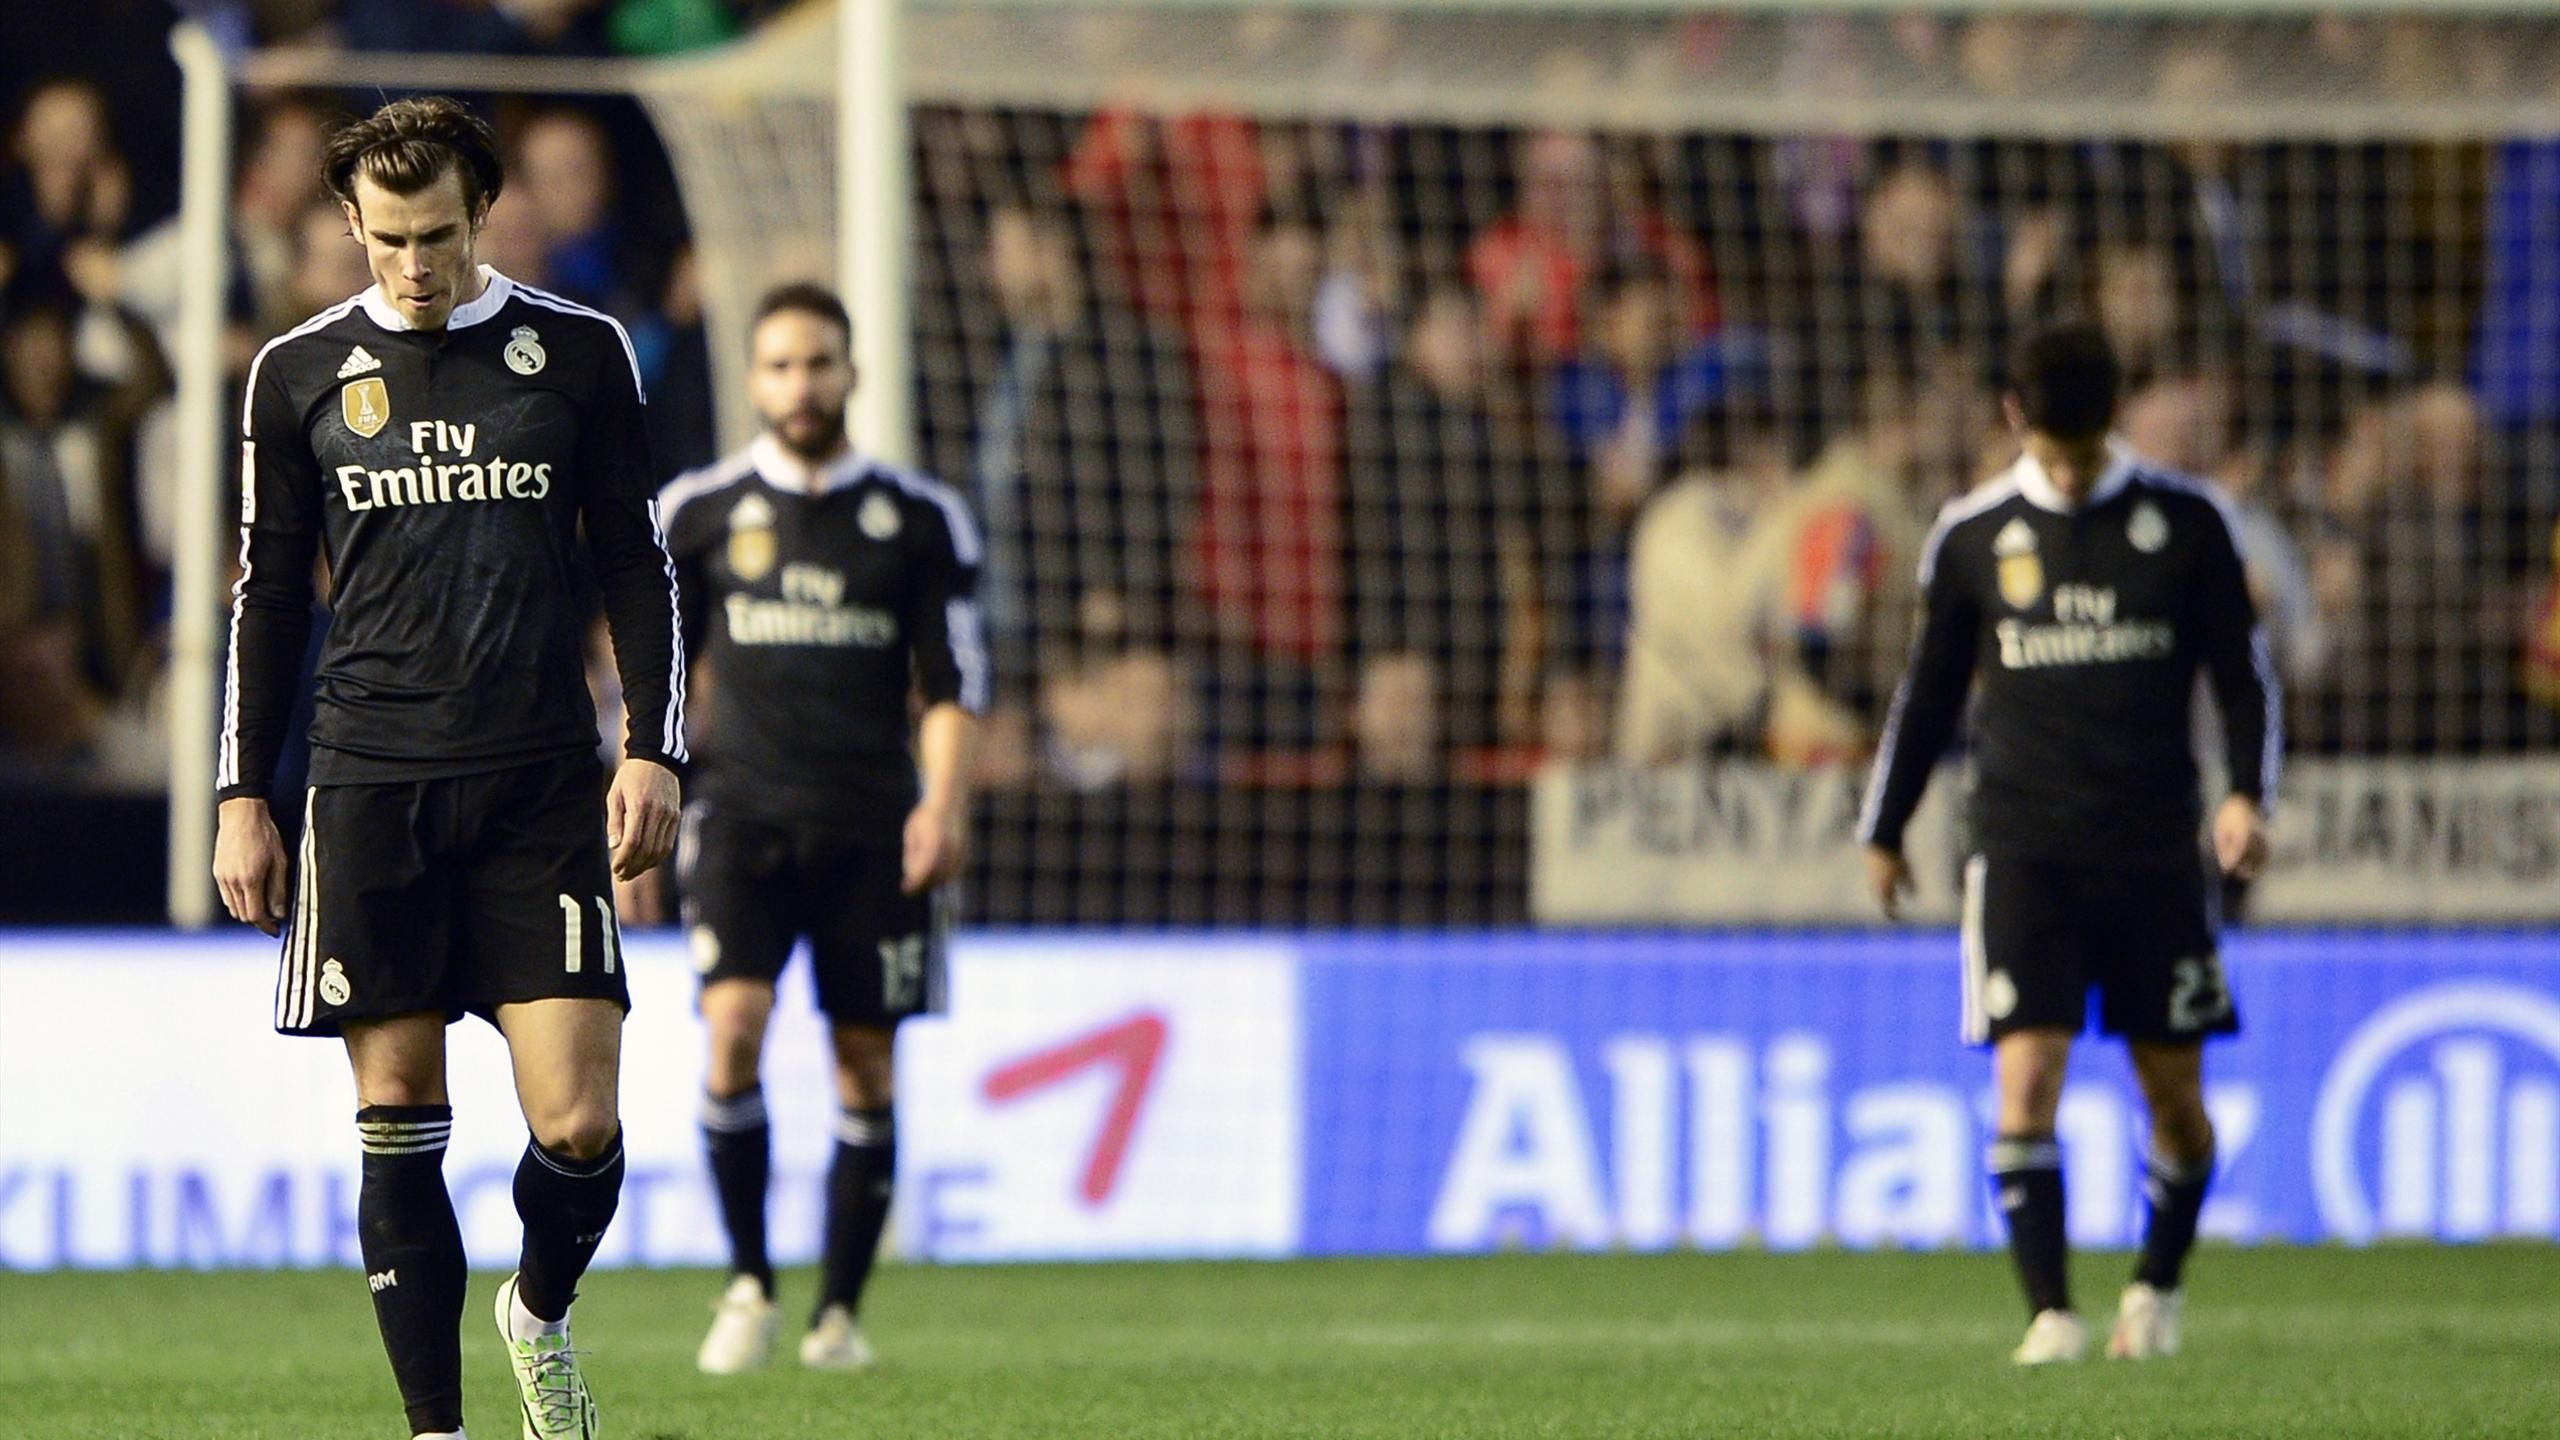 Valencia 2-1 Real Madrid. The winning streak finally came to an end